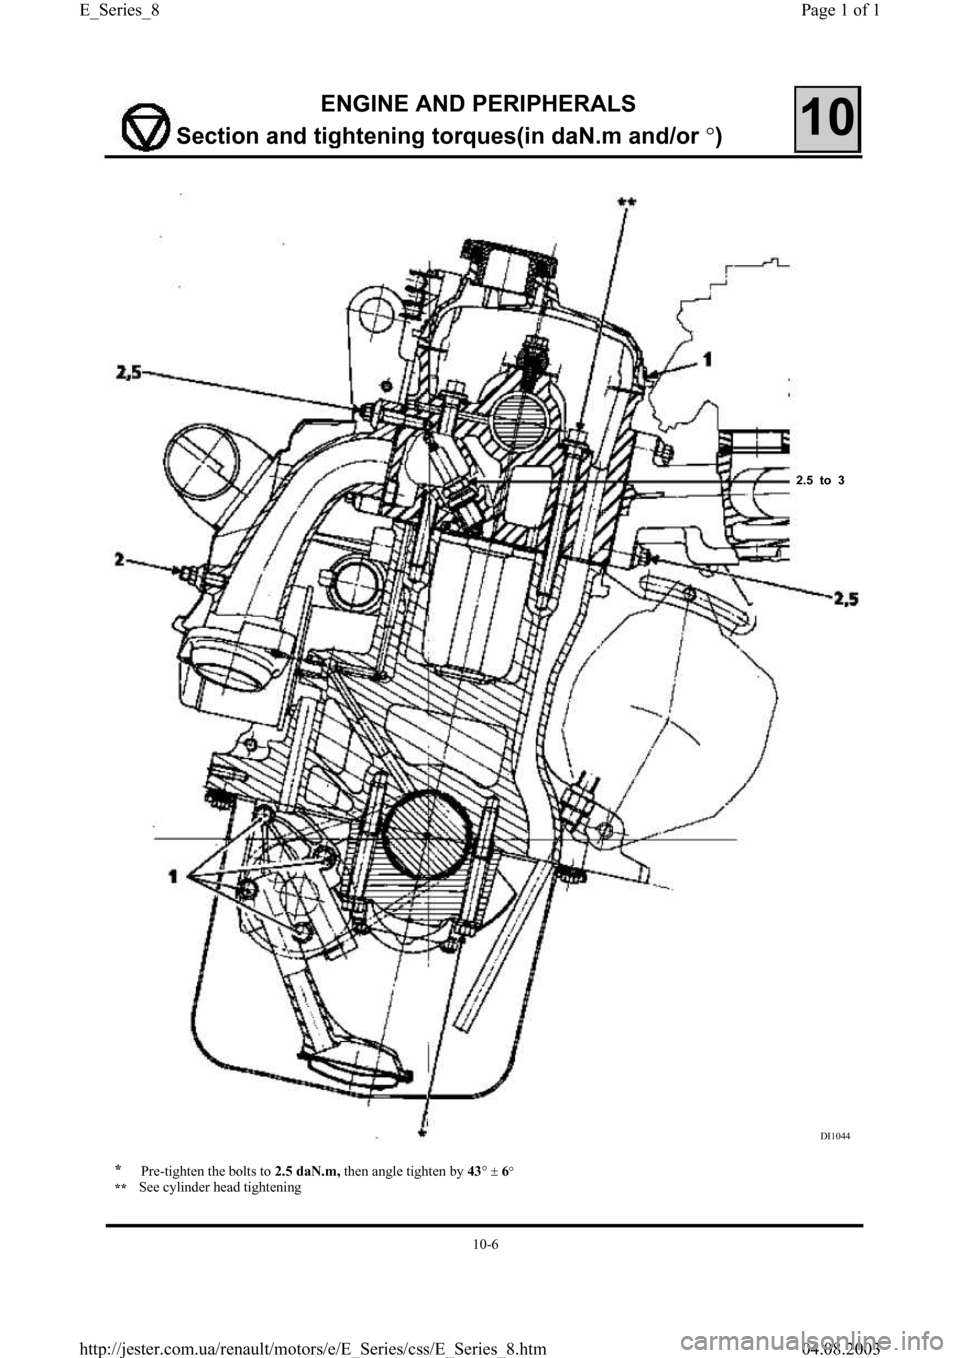 RENAULT CLIO 1997 X57 / 1.G Petrol Engines Workshop Manual ENGINE AND PERIPHERALS
Section and ti
ghtening torques(in daN.m and/or °)10
*
Pre-tighten the bolts to 
2.5 daN.m, then angle tighten by 
43°±6°
**    See cylinder head tightening
DI1044
2.5  to  